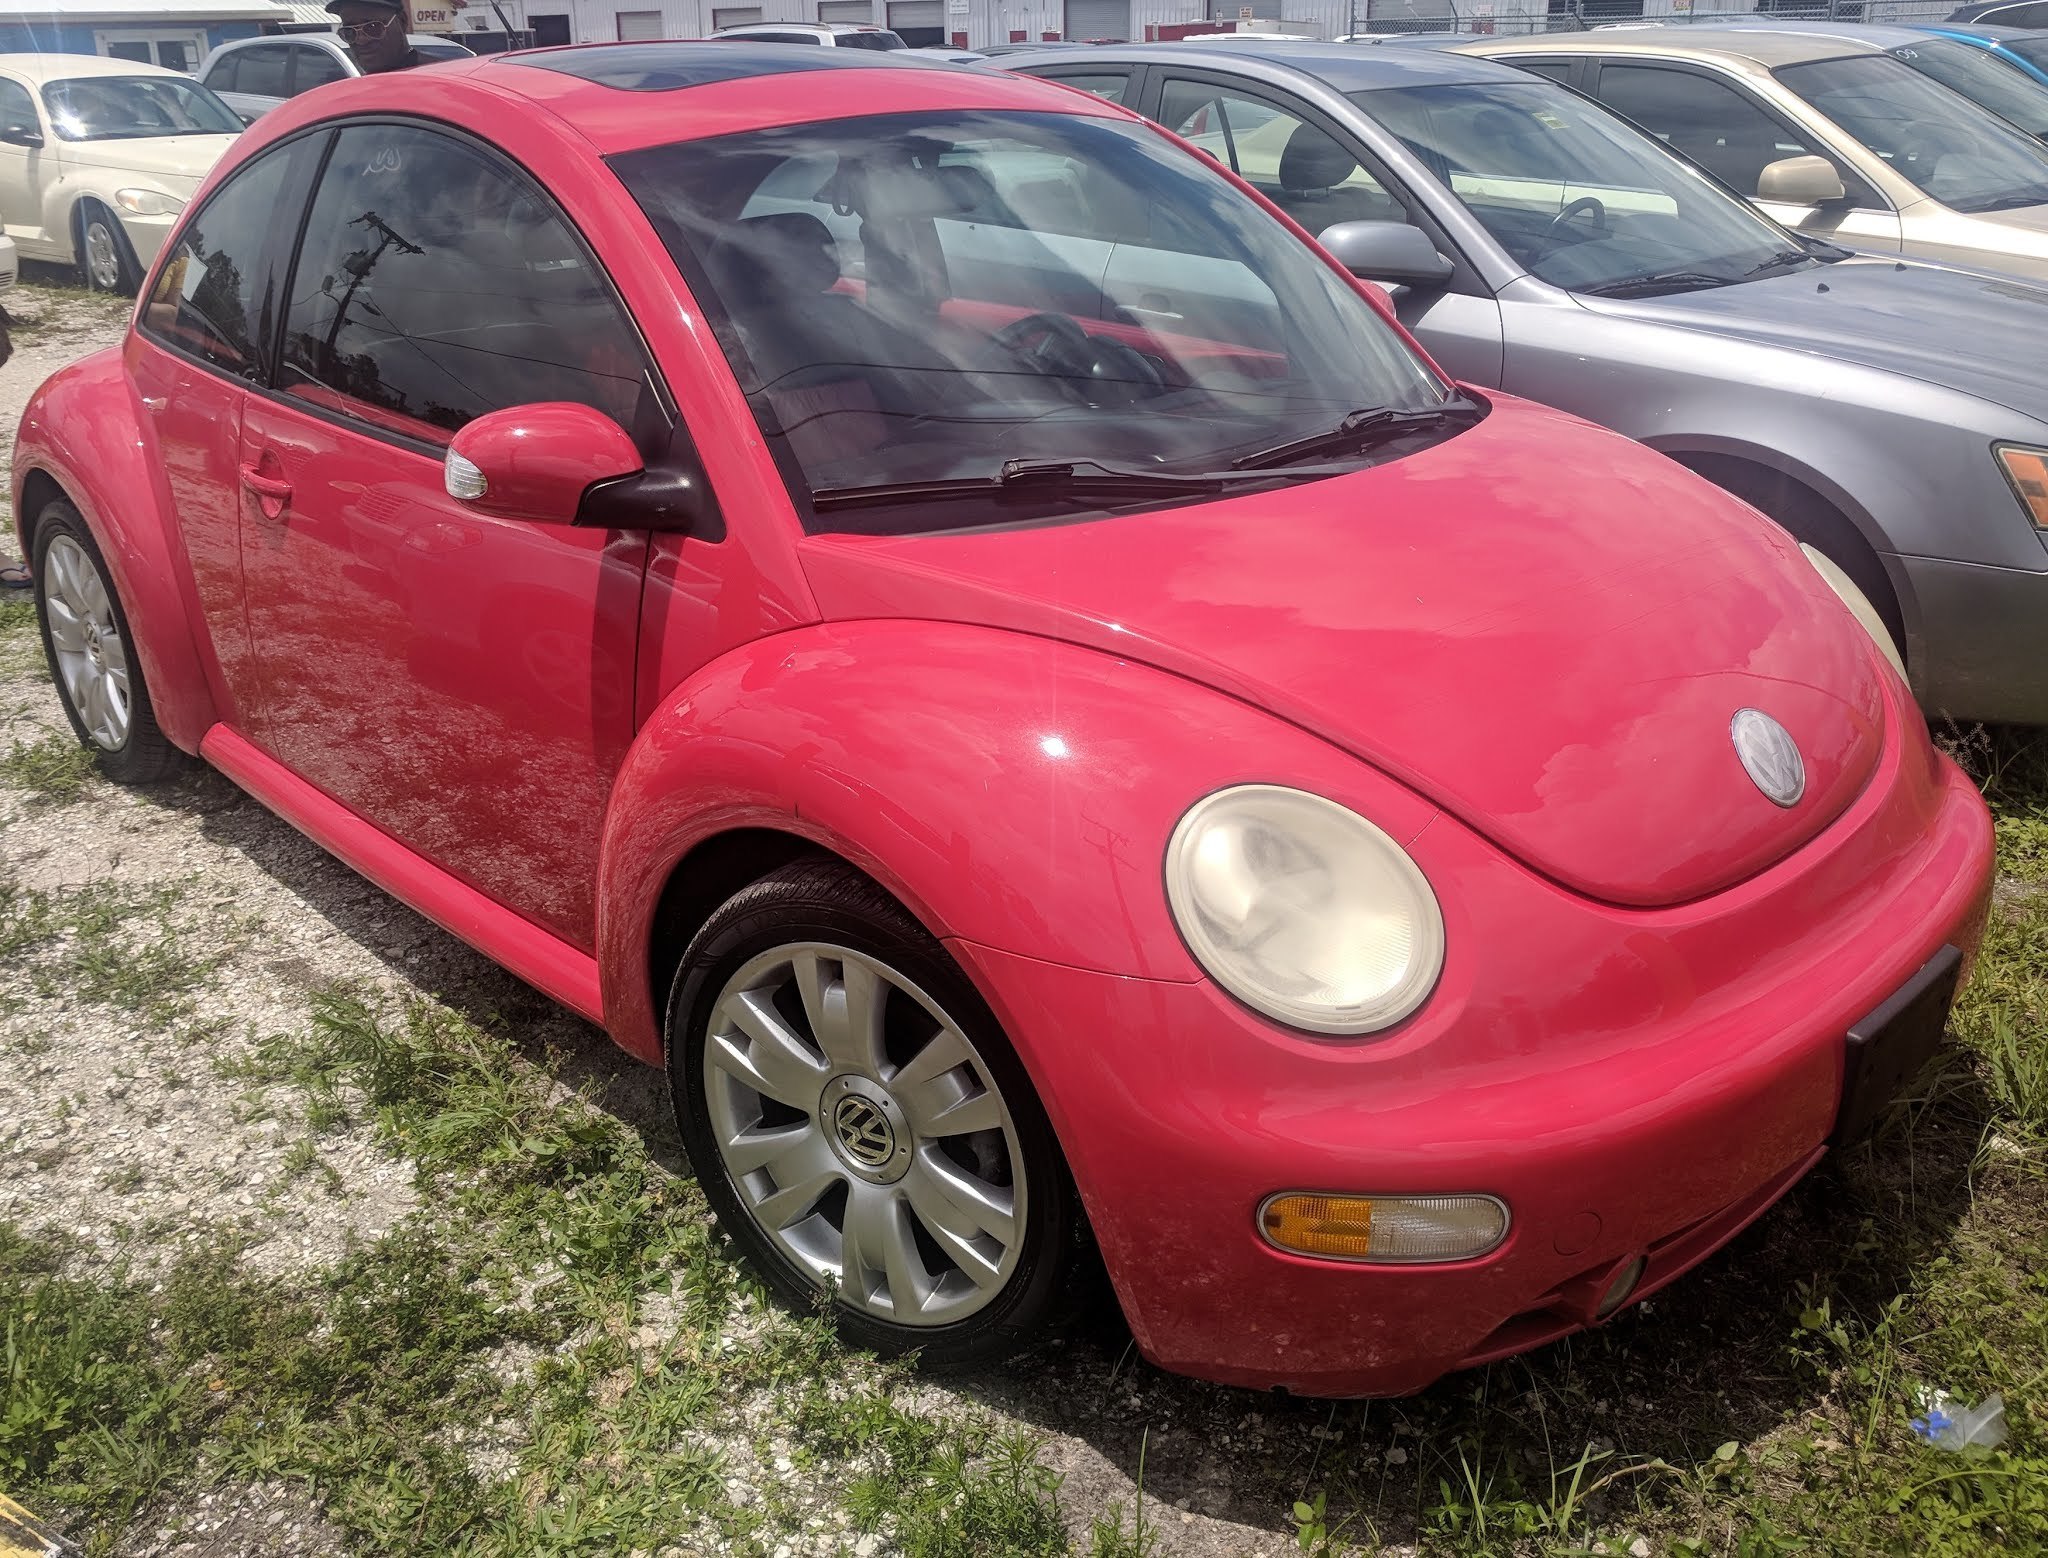 2003 Beetle on the lot